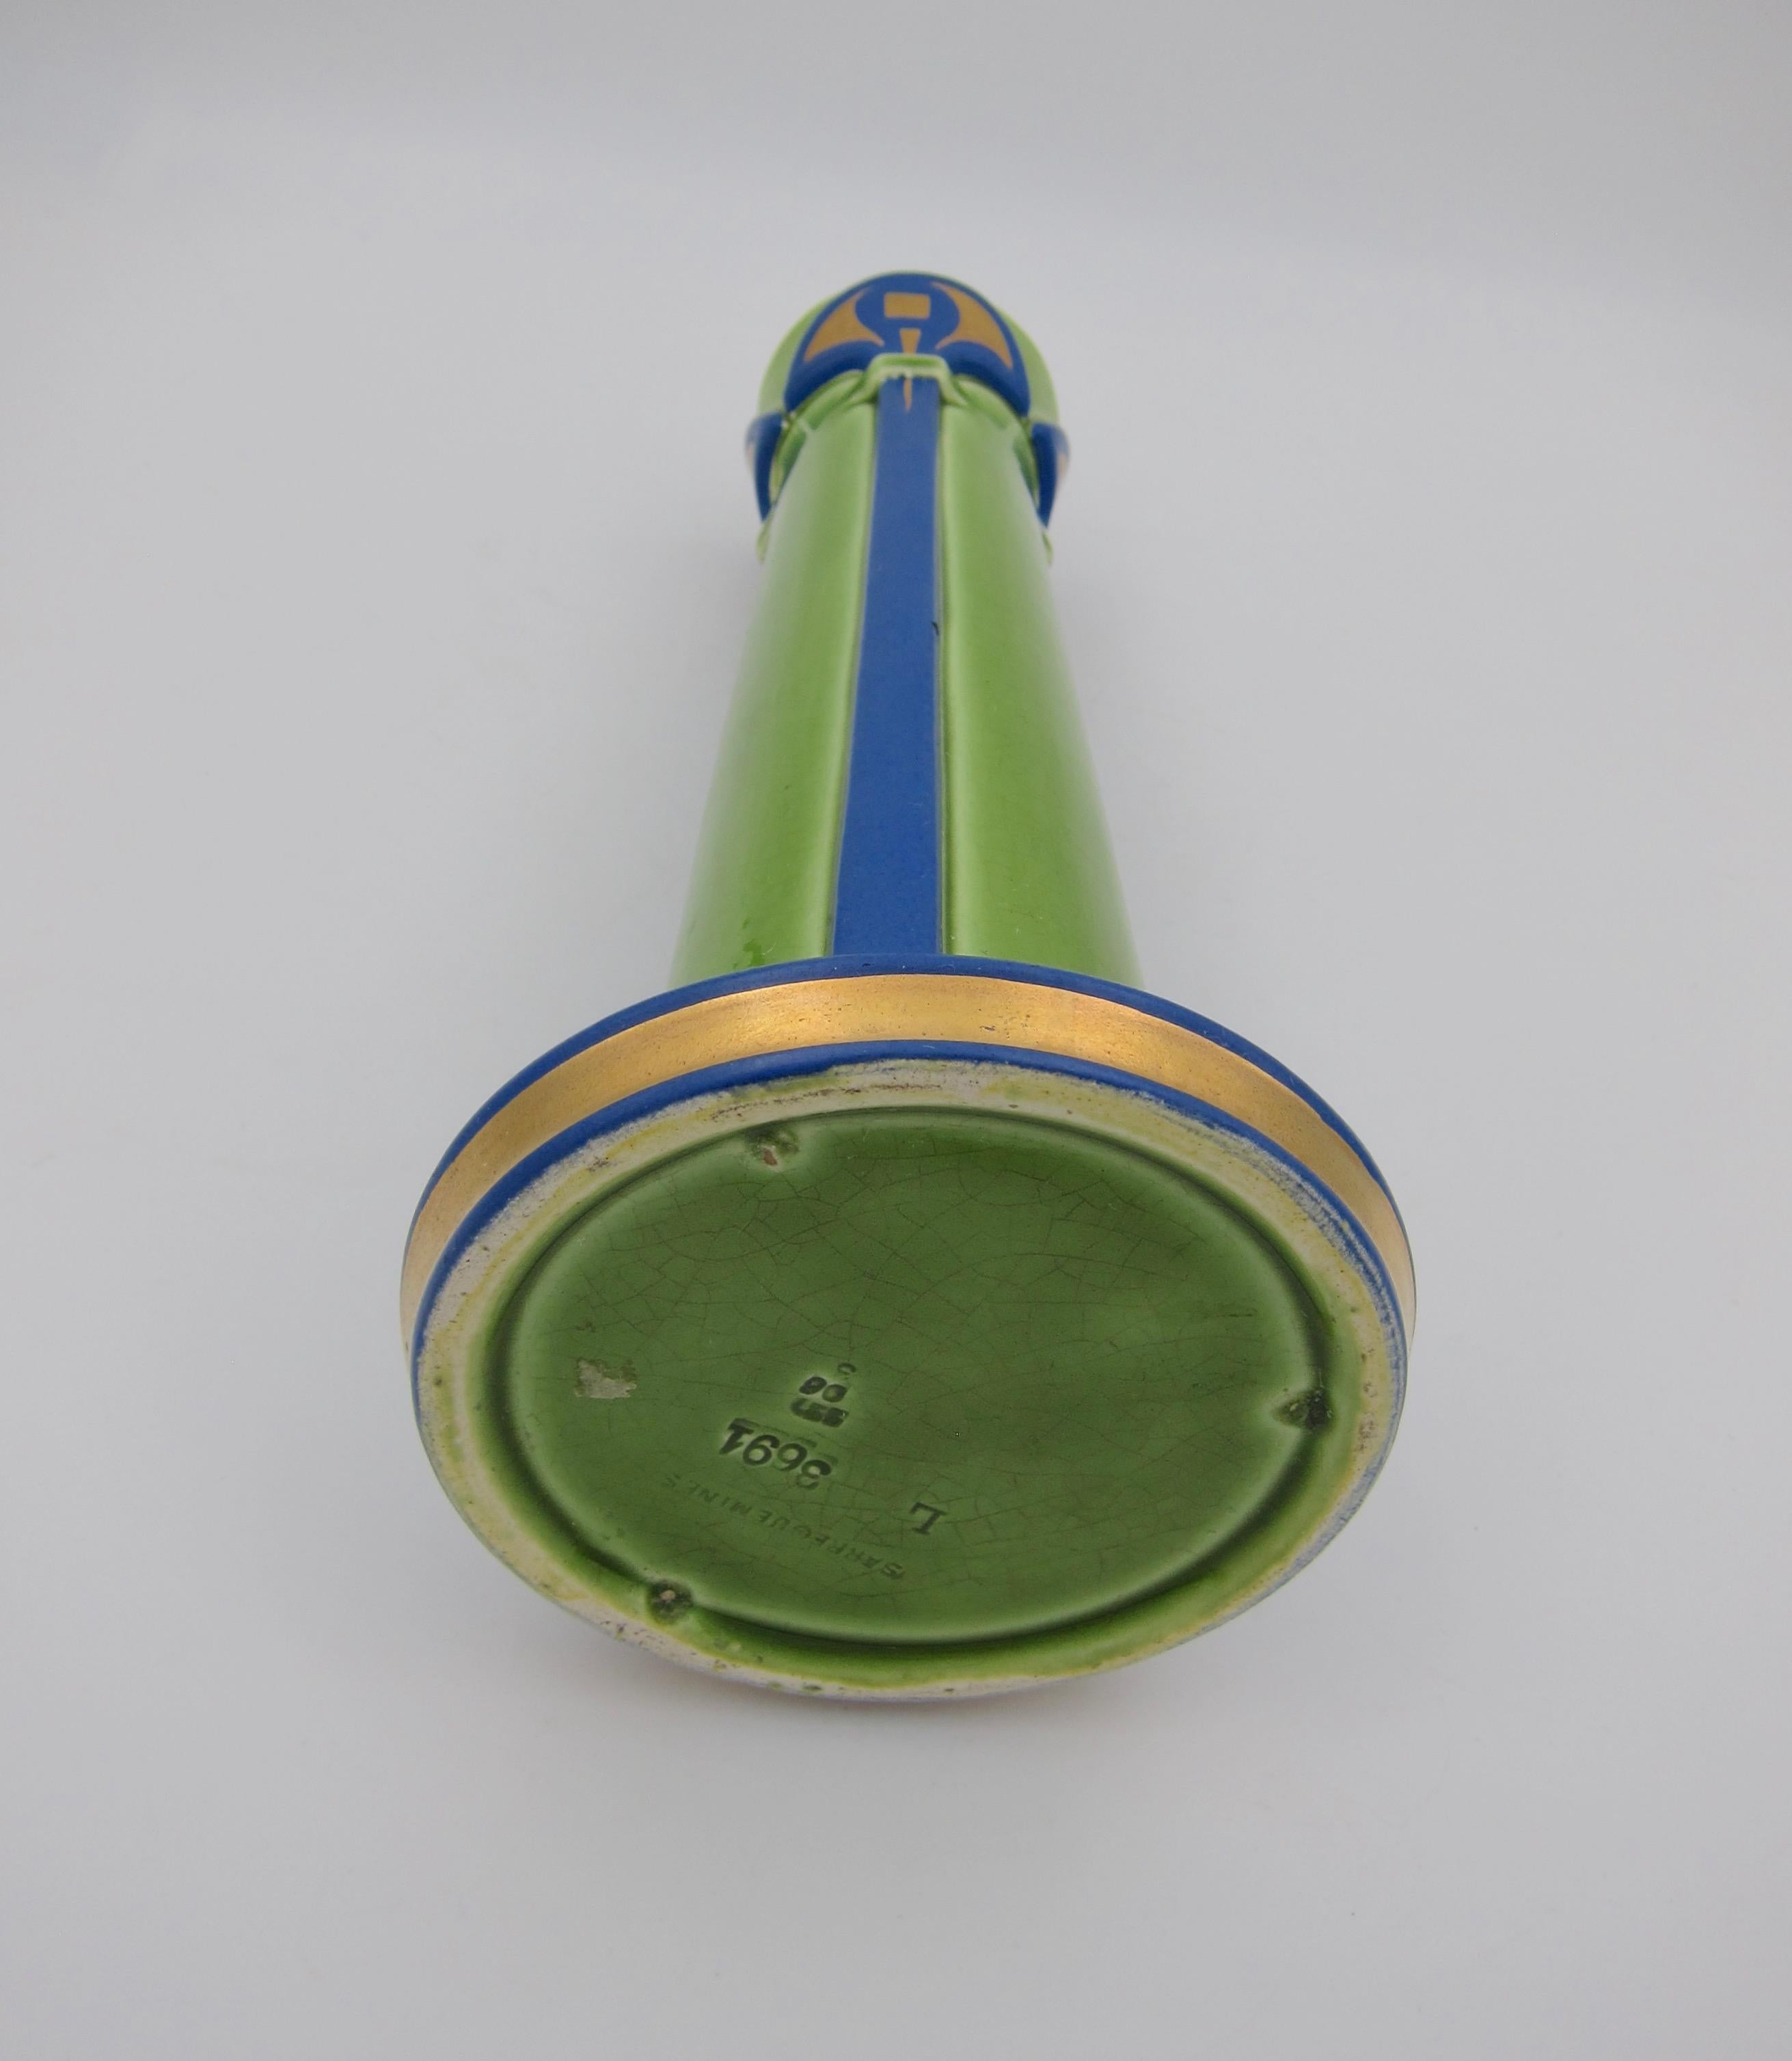 Earthenware French Sarreguemines Art Pottery Vase in Blue, Green and Gold, Marked 1906